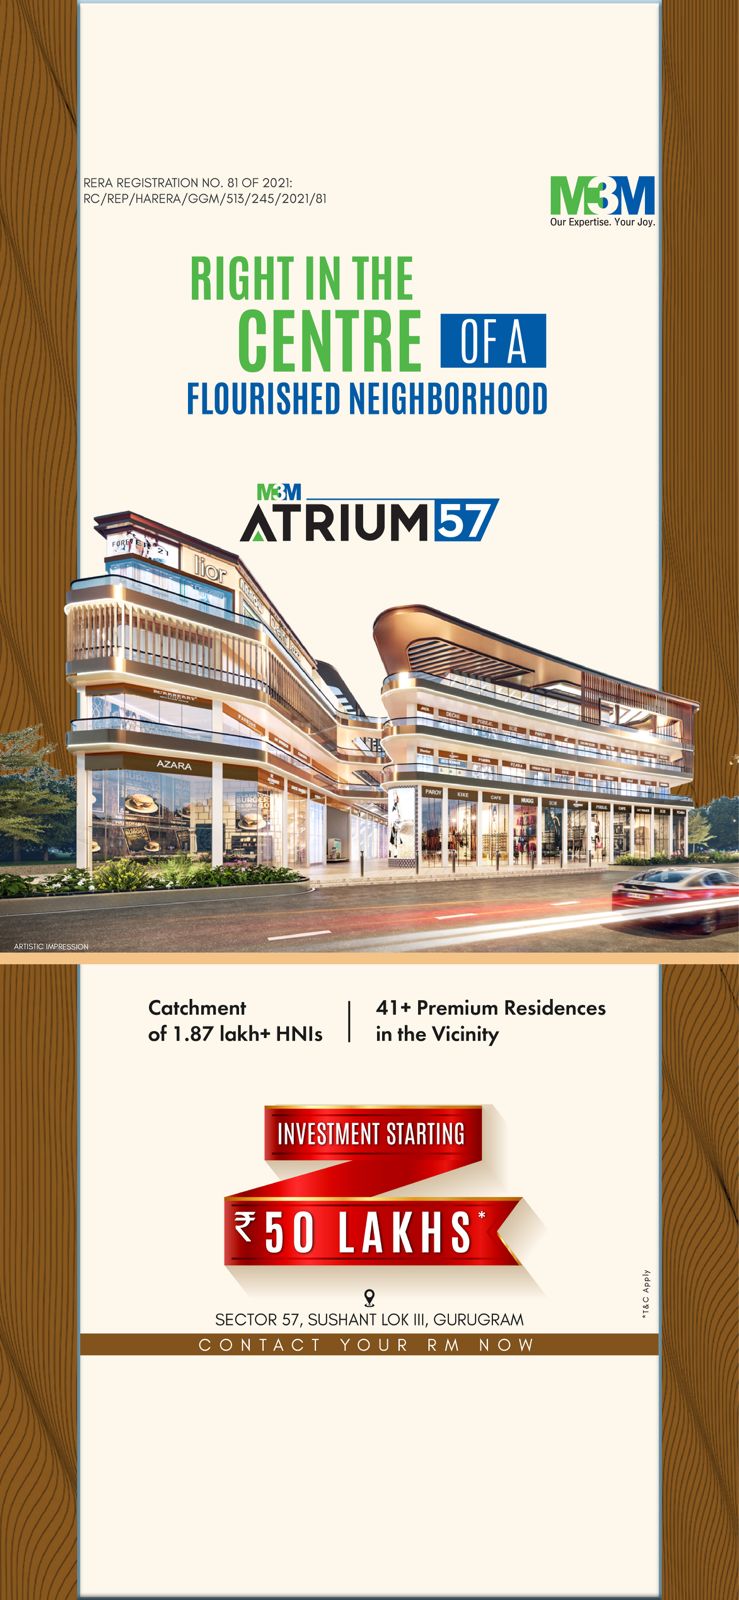 Right in the centre of a  flourished neighborhood at M3M Atrium 57, Gurgaon Update